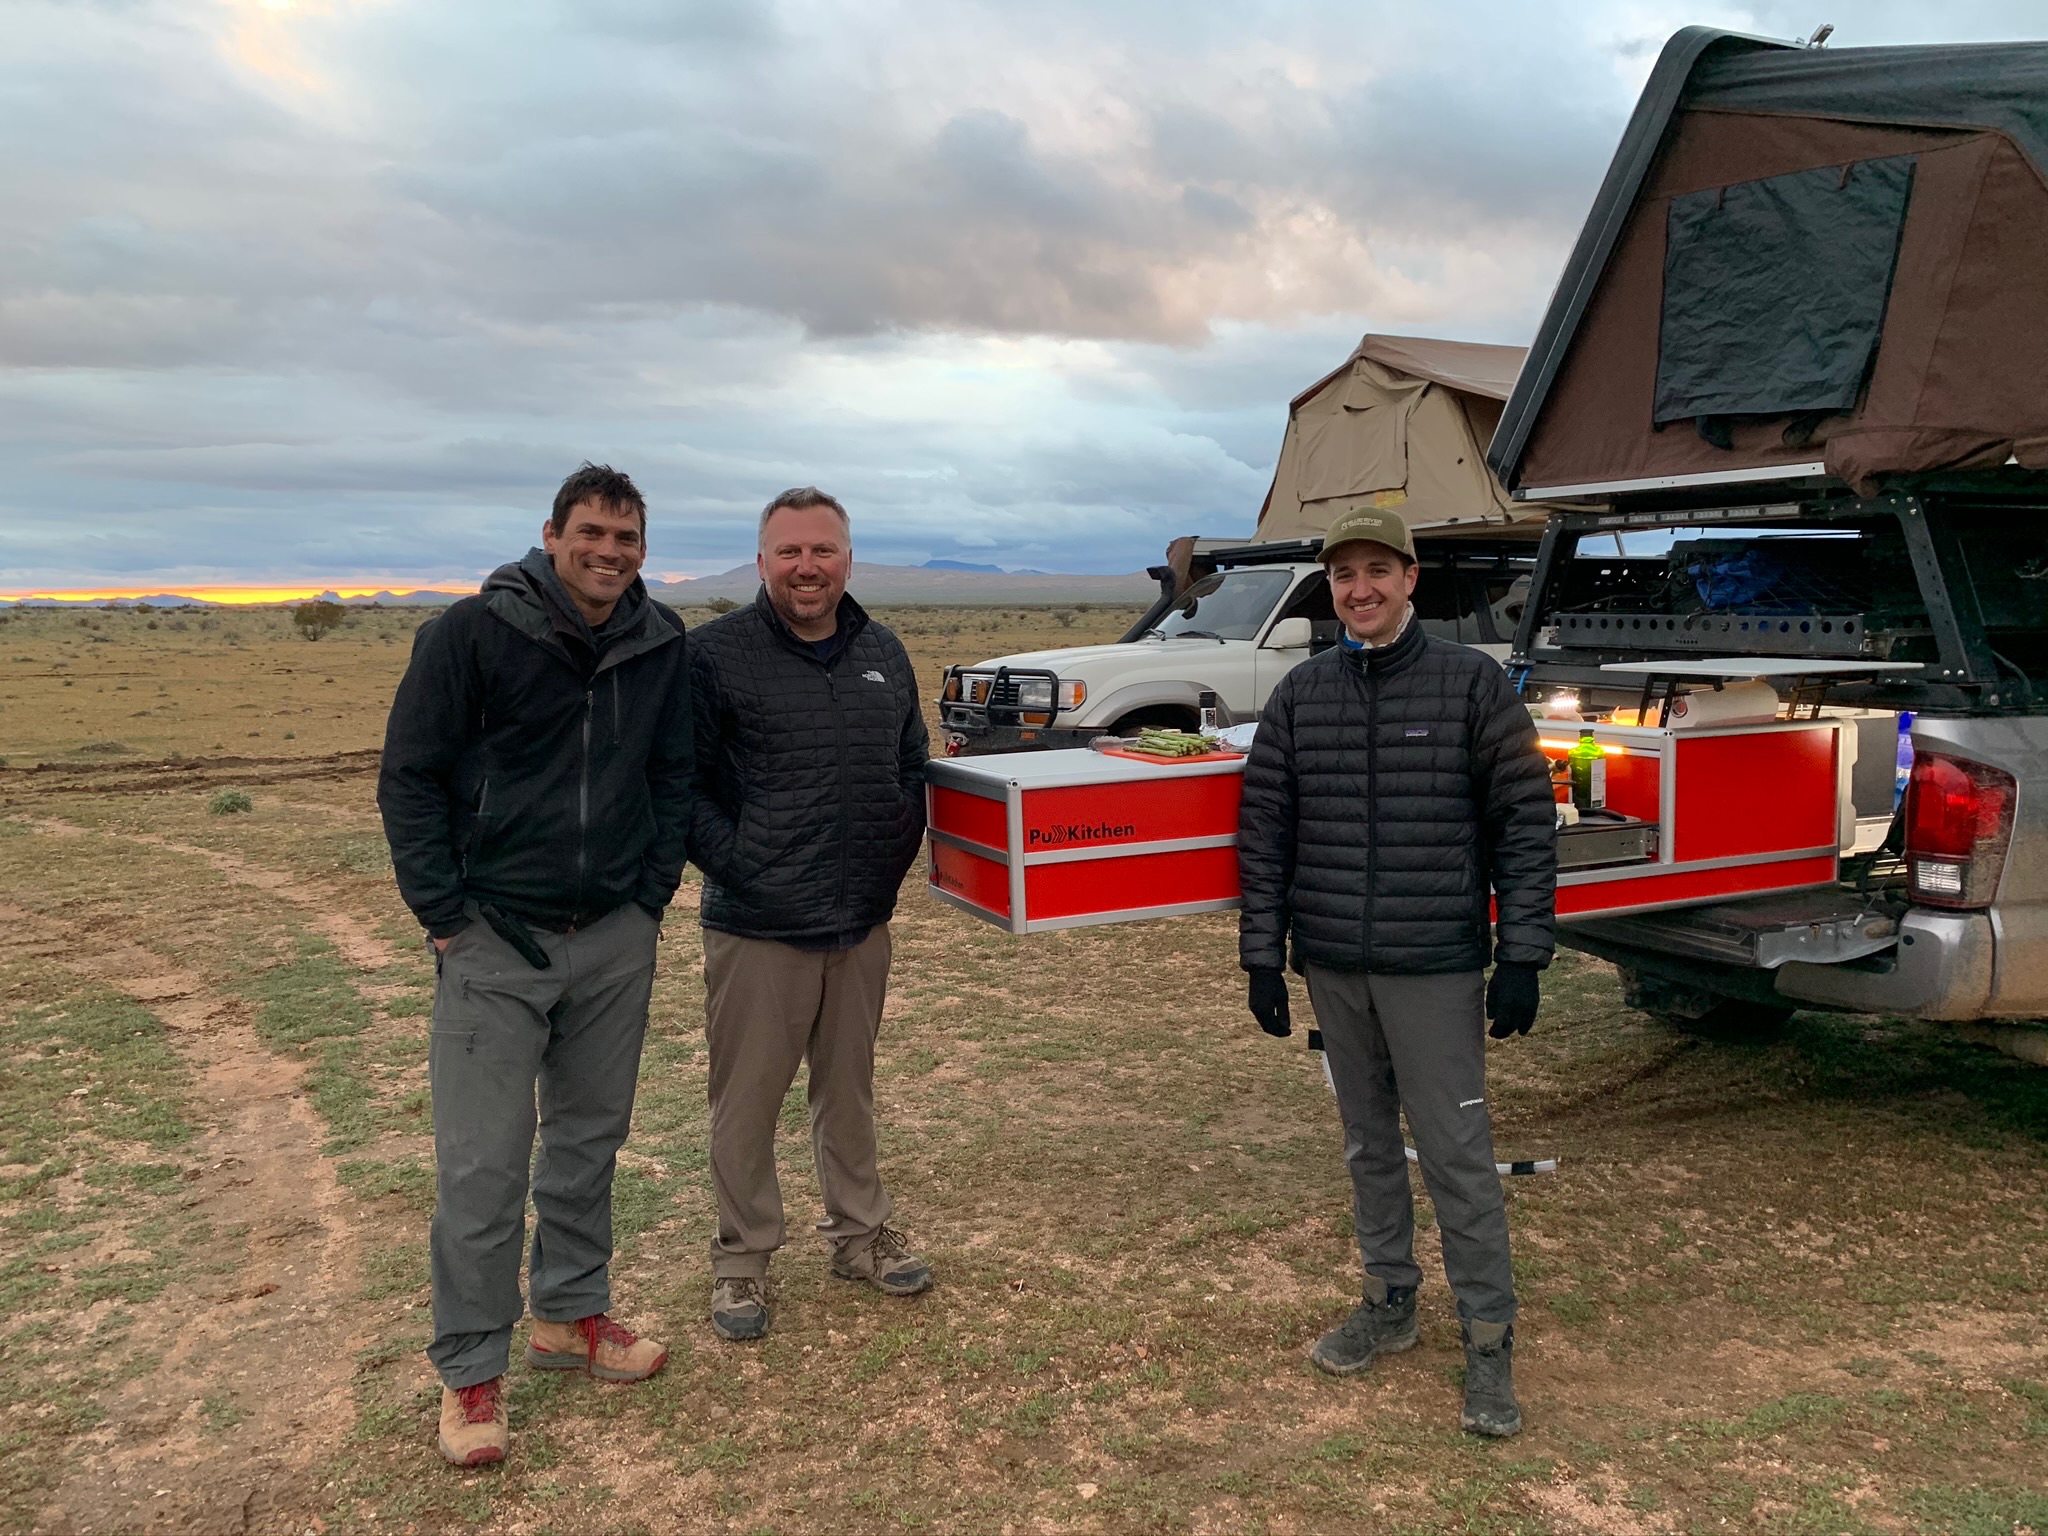 Dave Addington with fellow Overland Bound members standing around his truck.